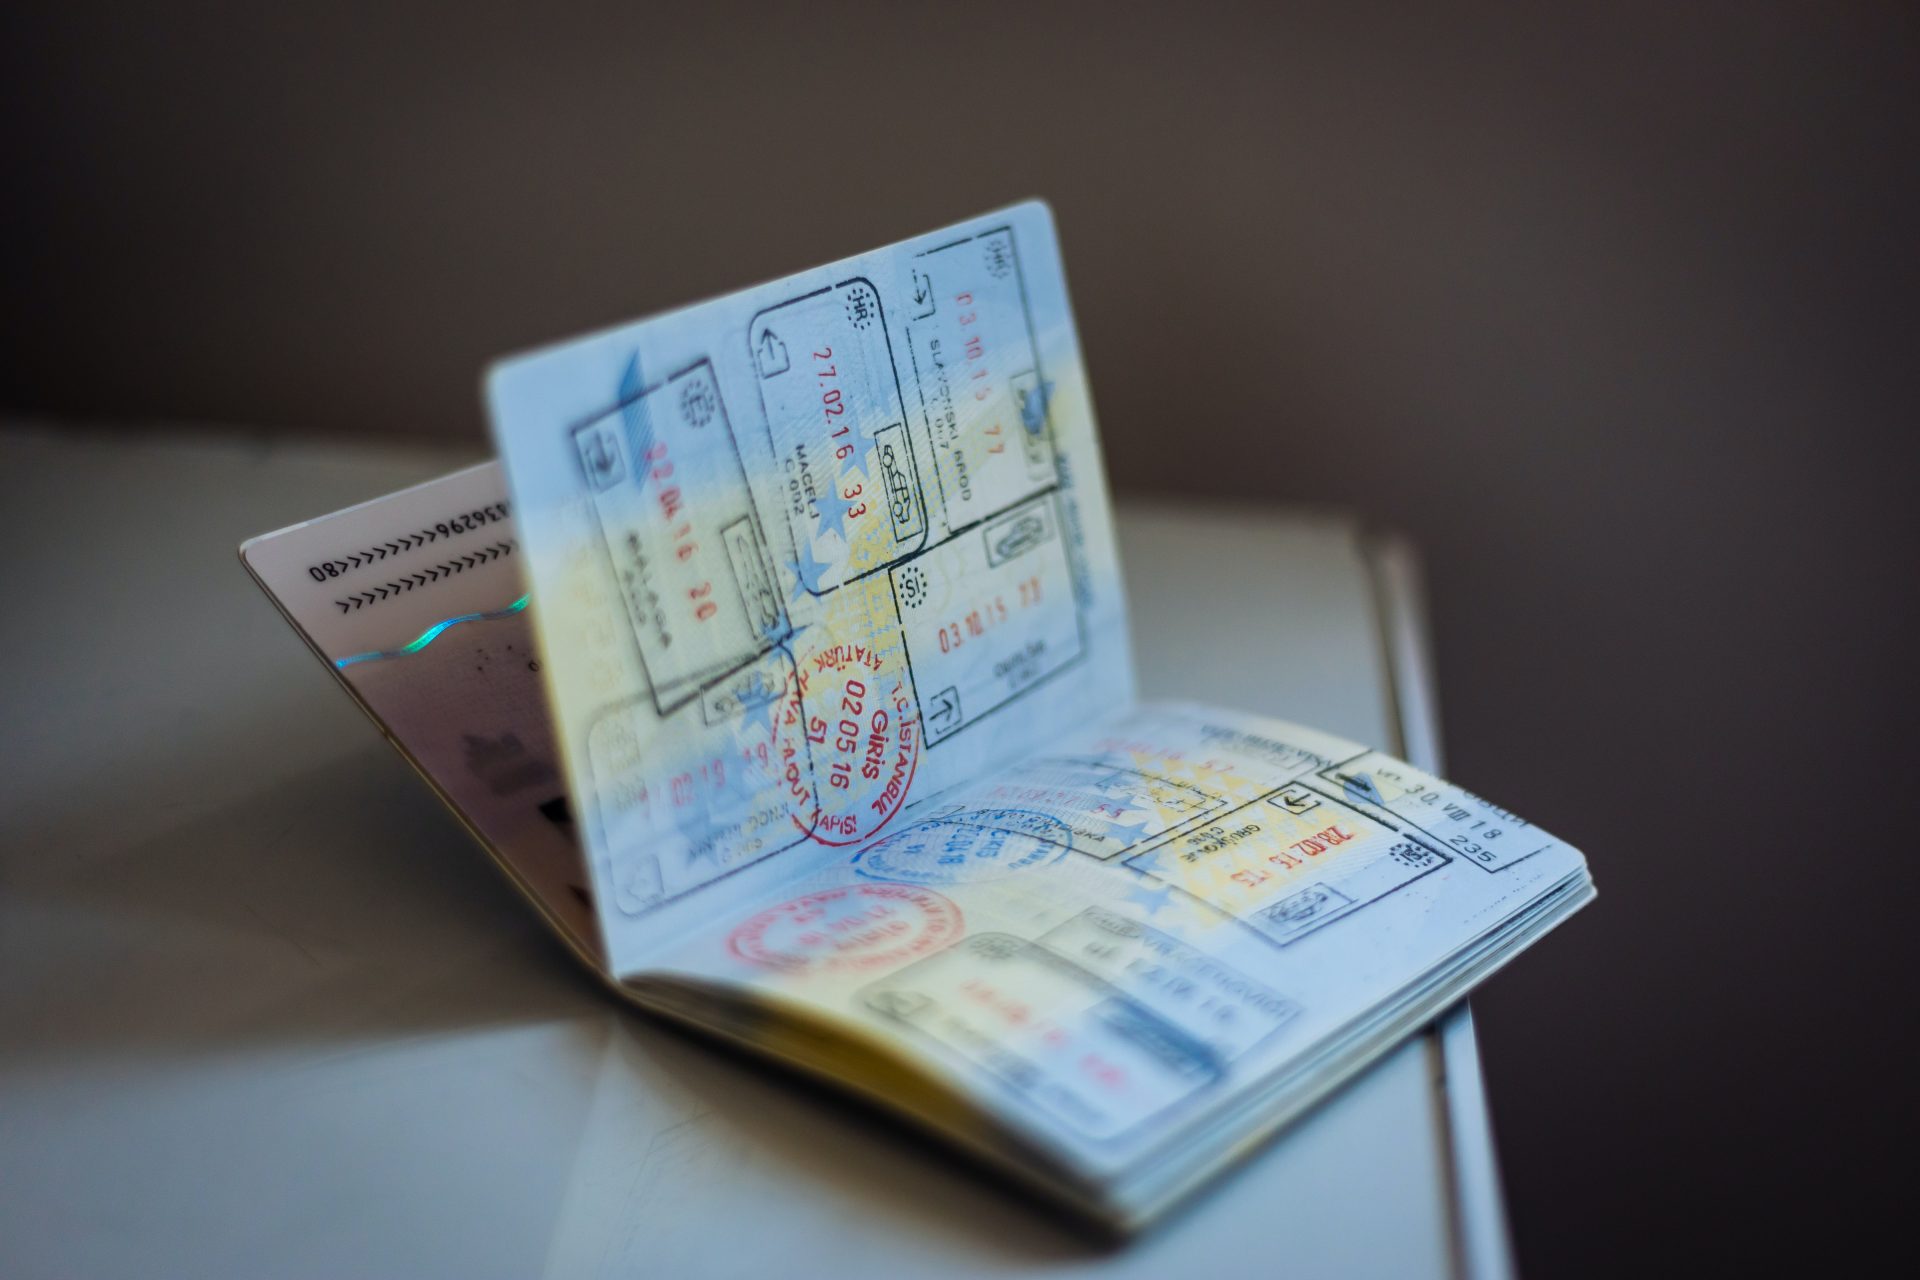 Extending Argentine tourist visa with stamps